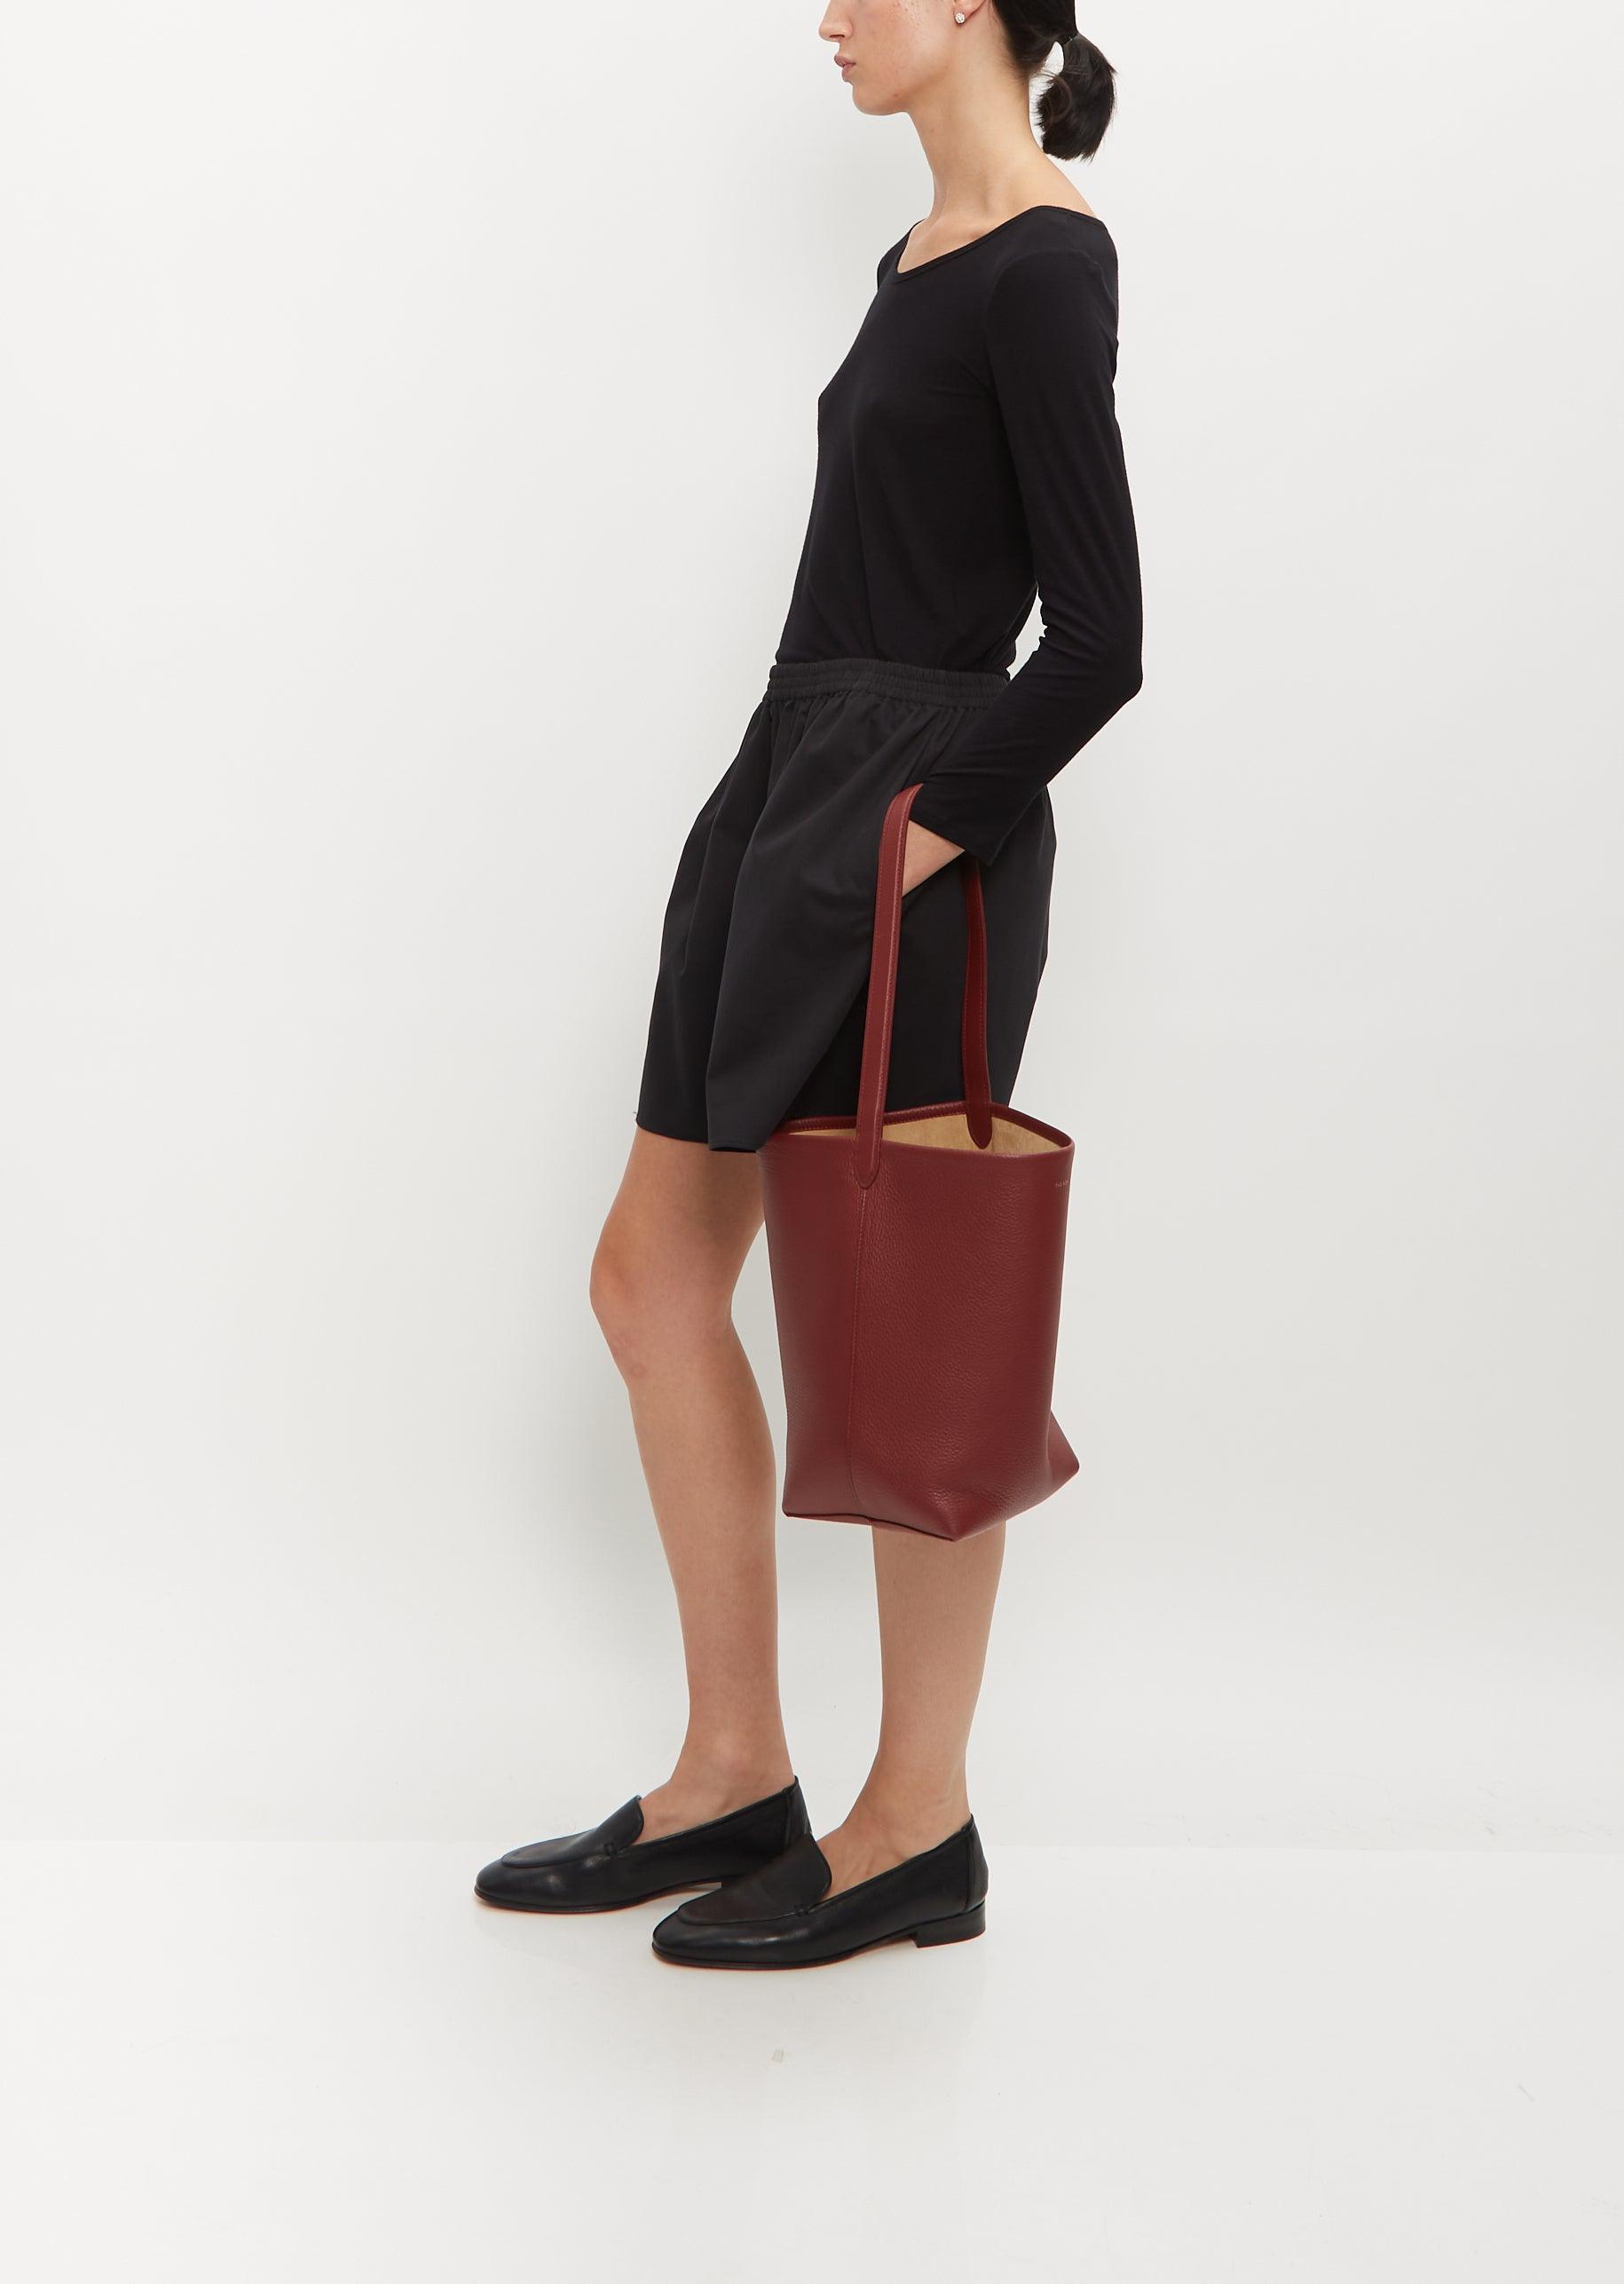 The Row N/s Park Textured-leather Tote